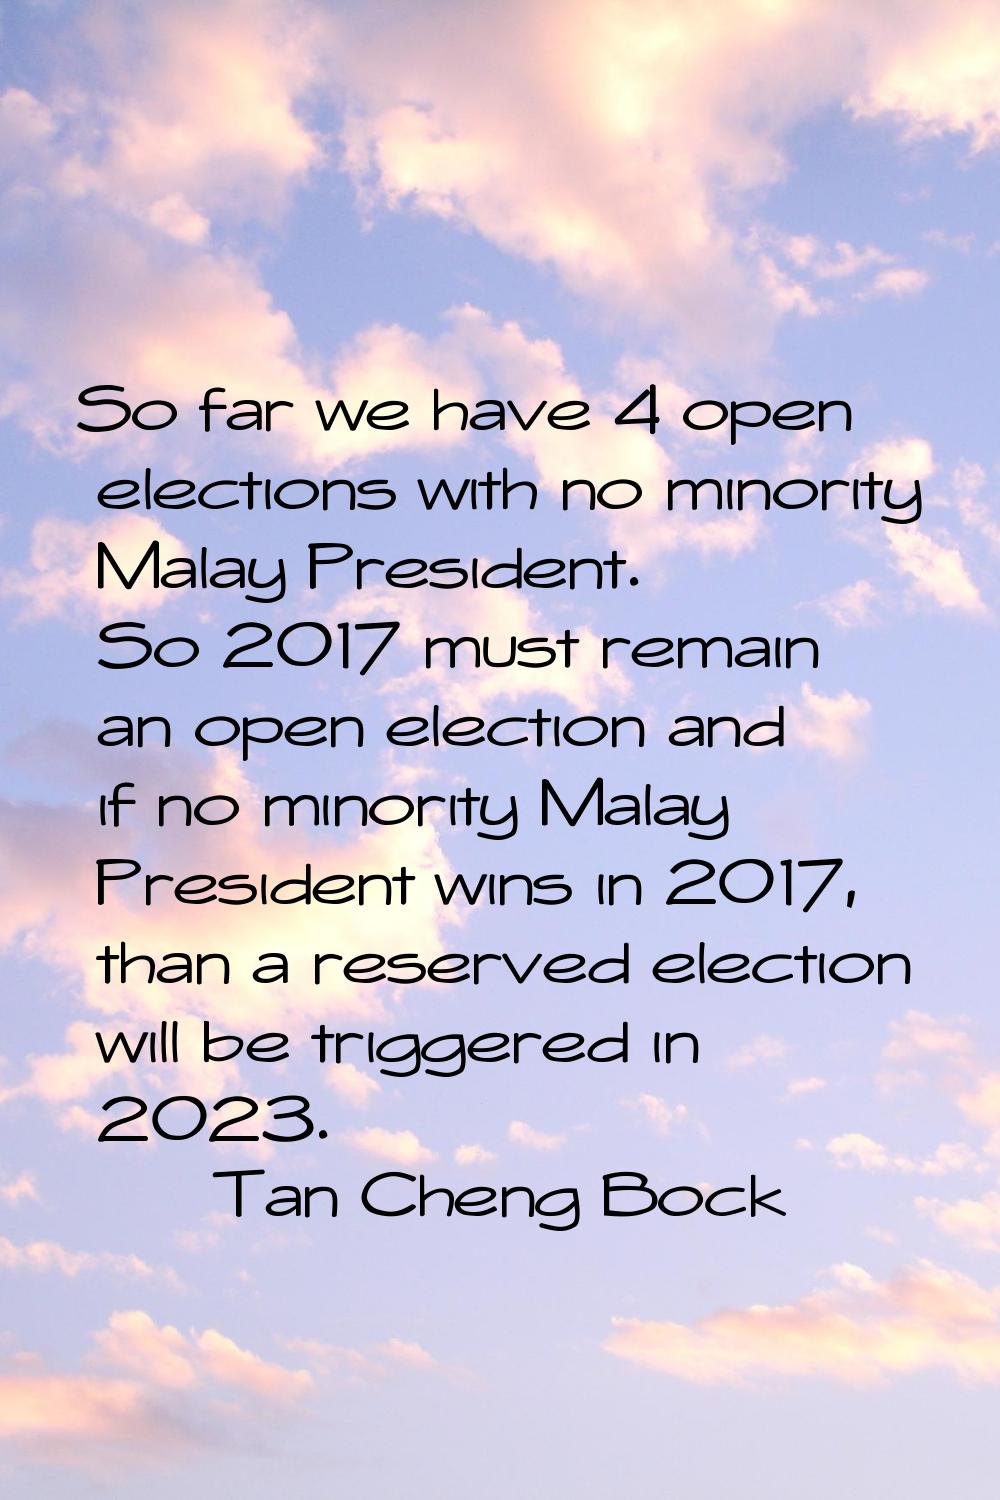 So far we have 4 open elections with no minority Malay President. So 2017 must remain an open elect